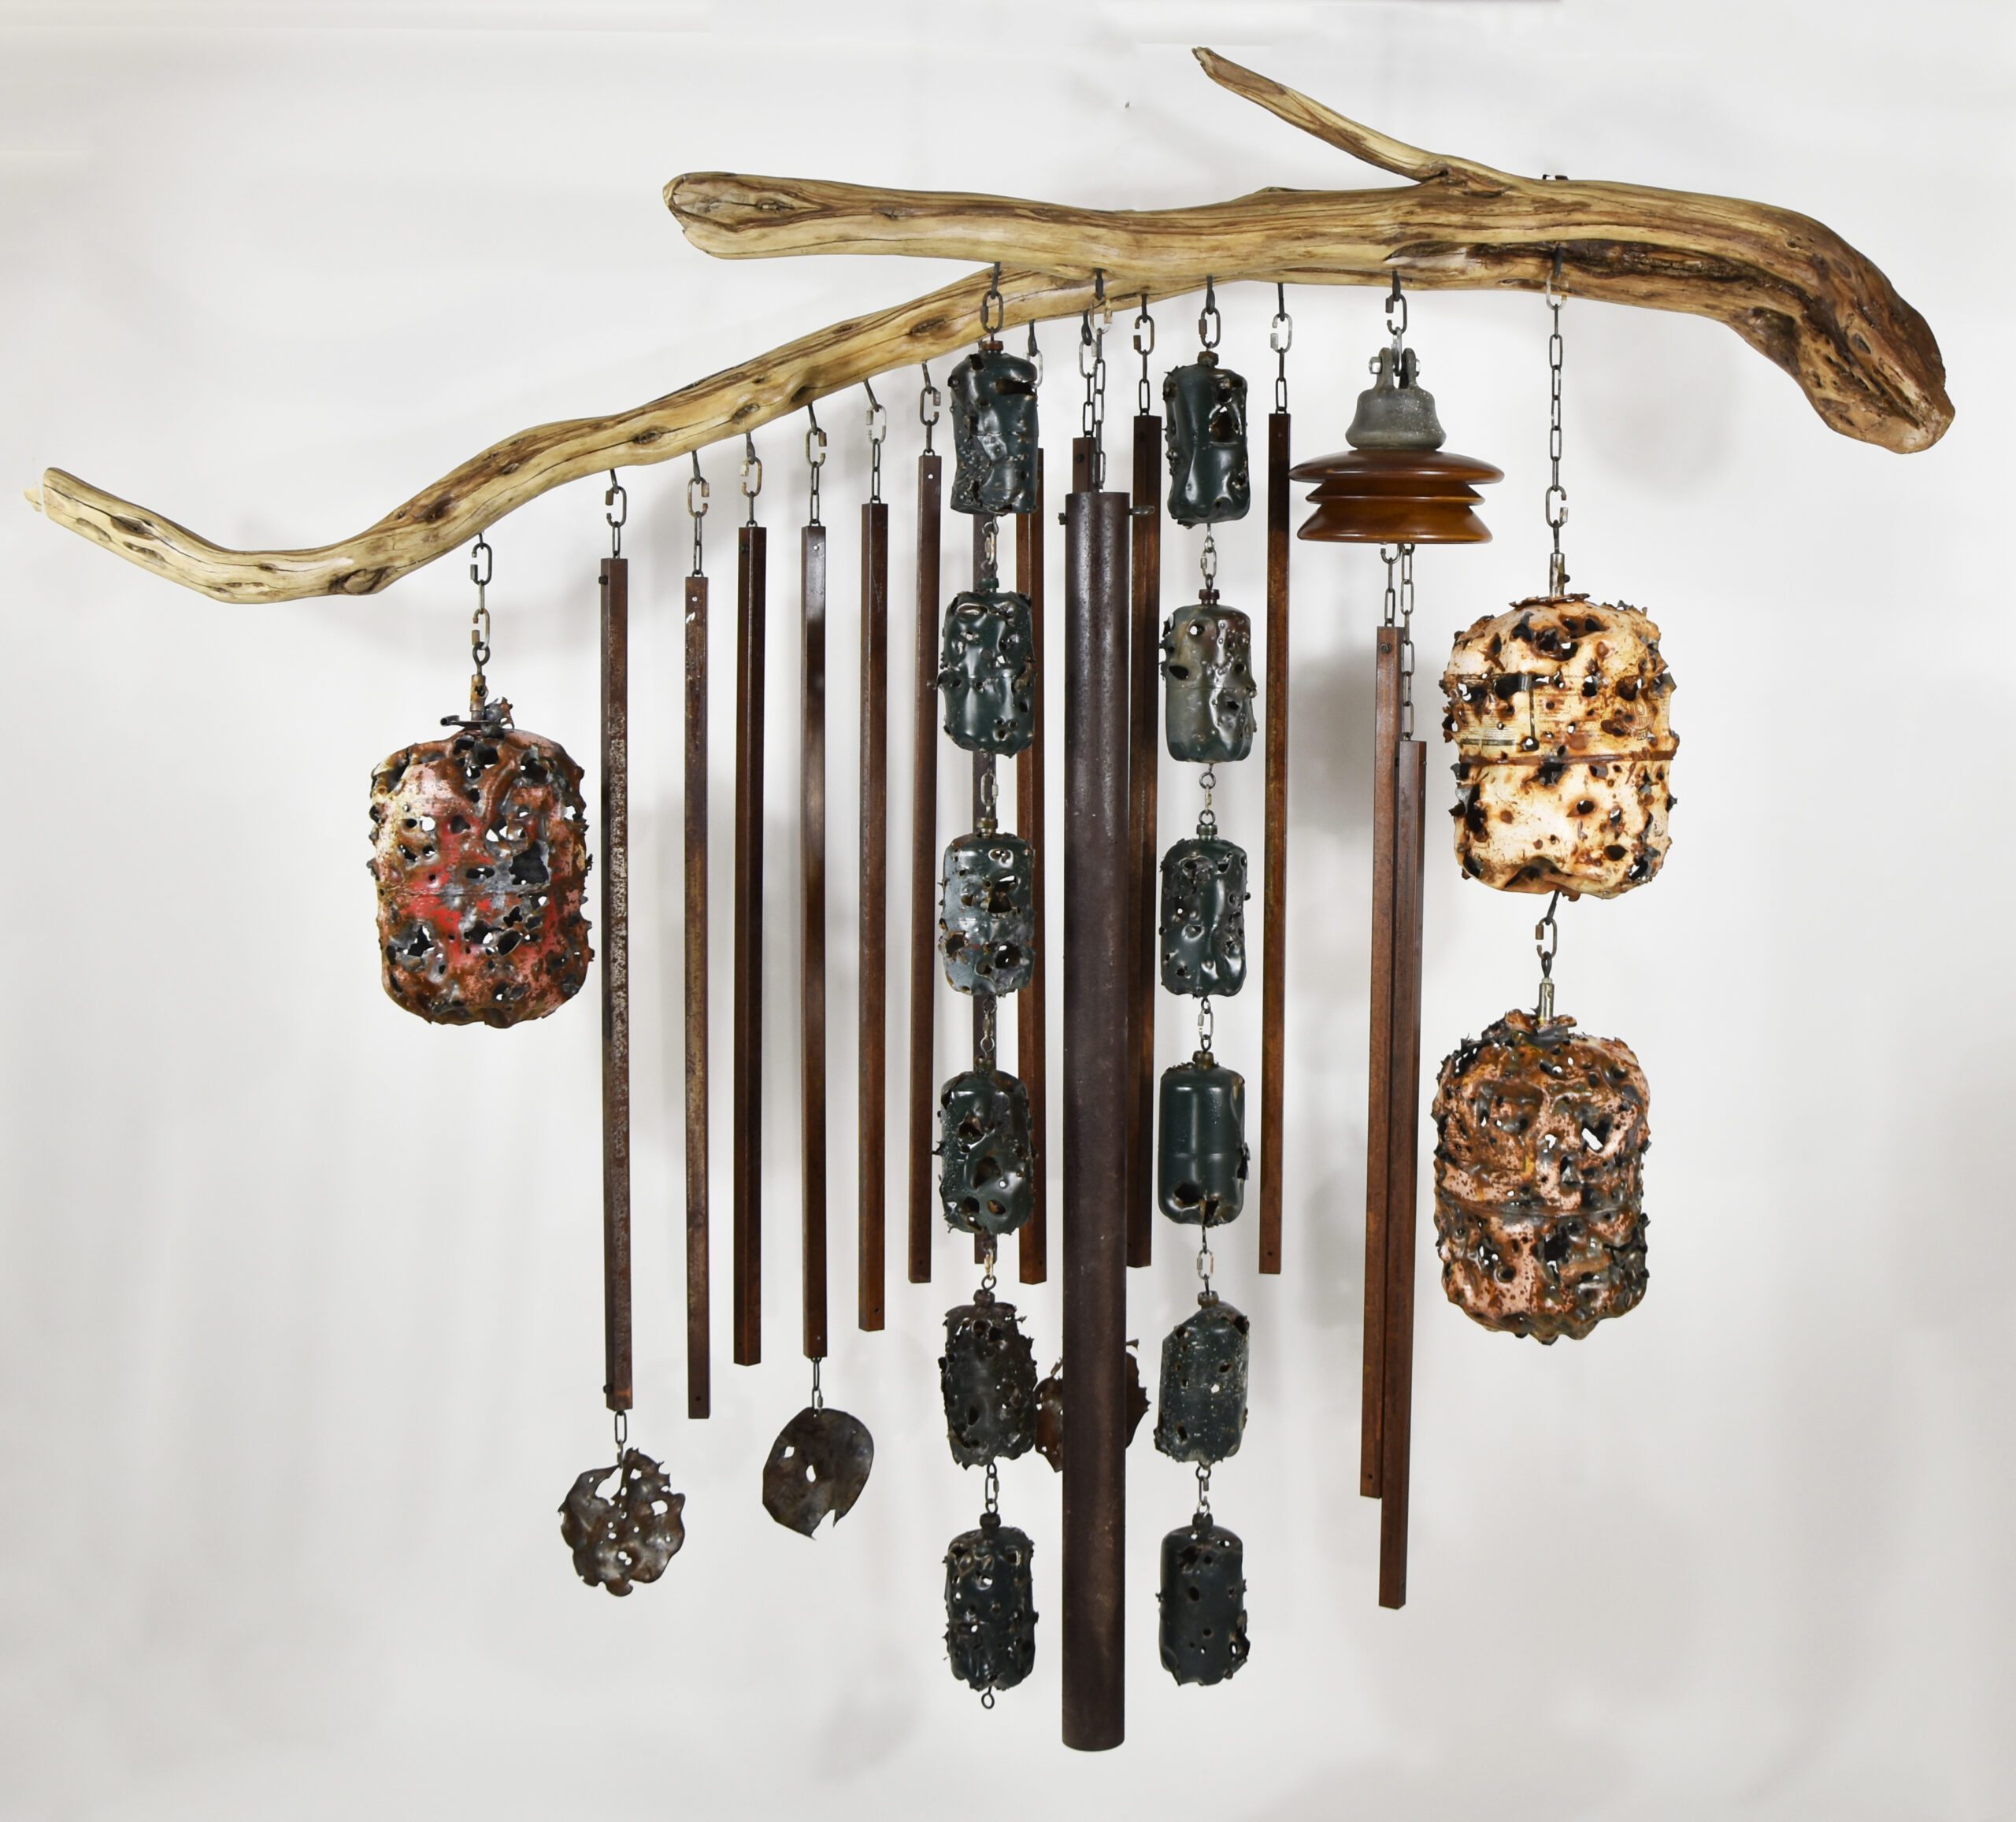 Giant & Unique Wind Chime Art named as Hephalunk